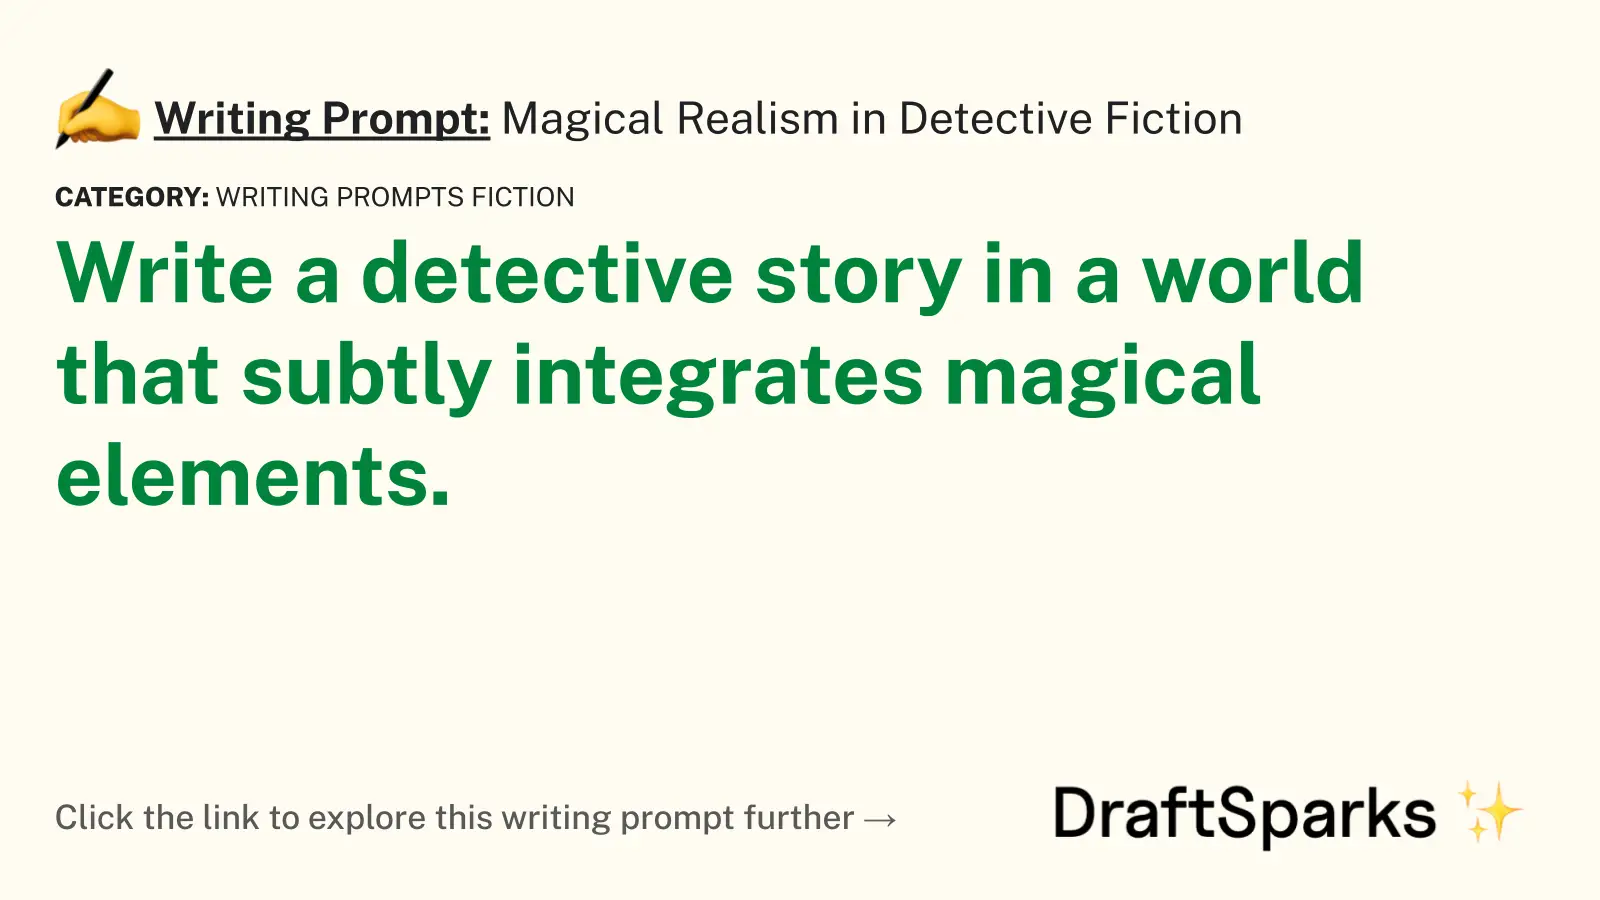 Magical Realism in Detective Fiction